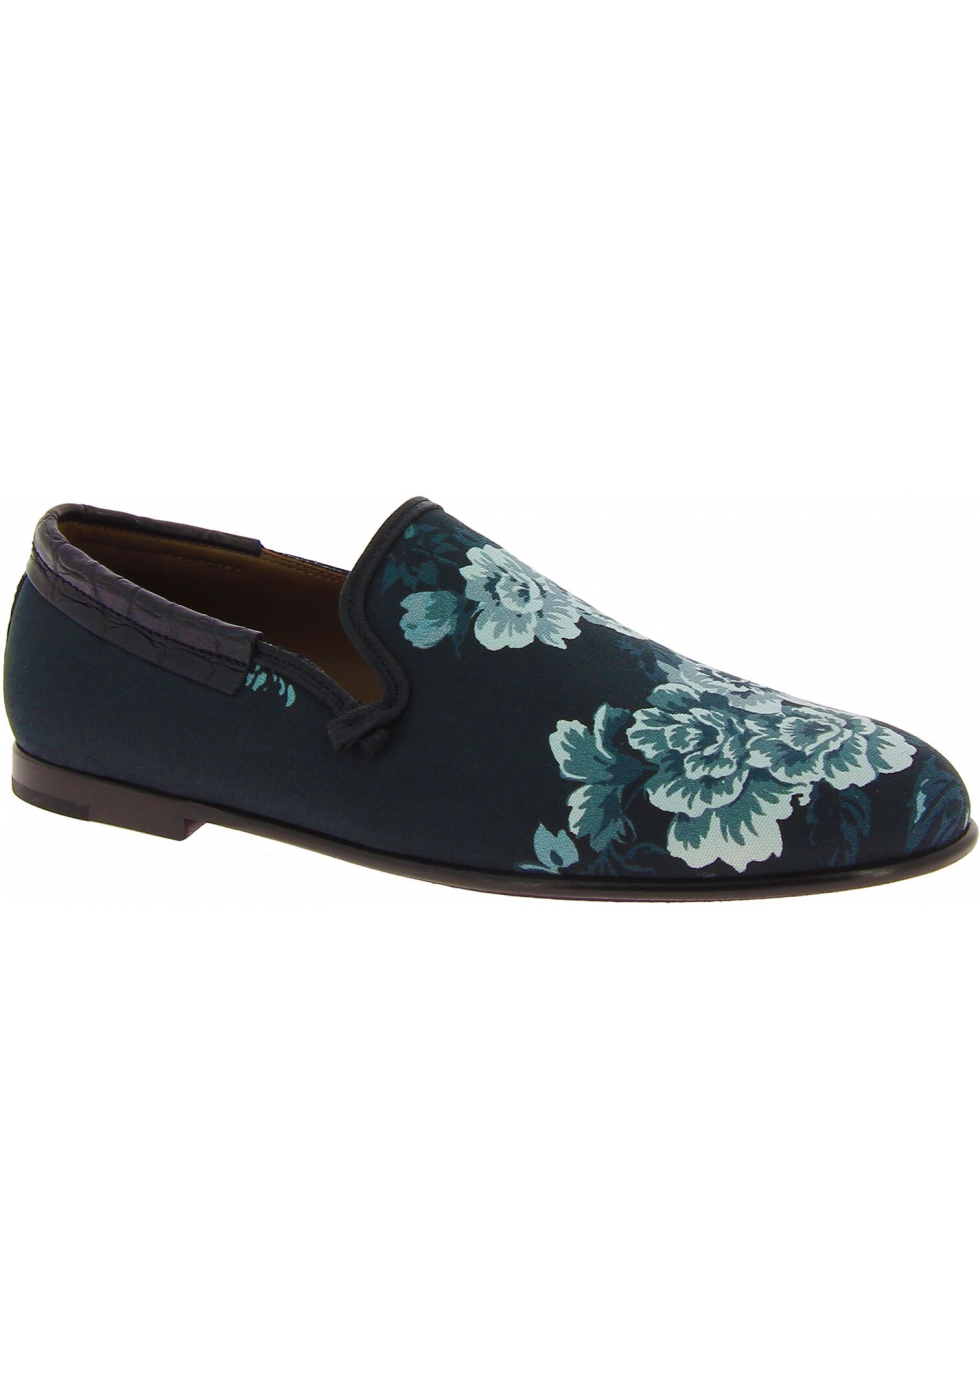 Dolce&Gabbana Men's loafers shoes in crocodile printed blue azure ...